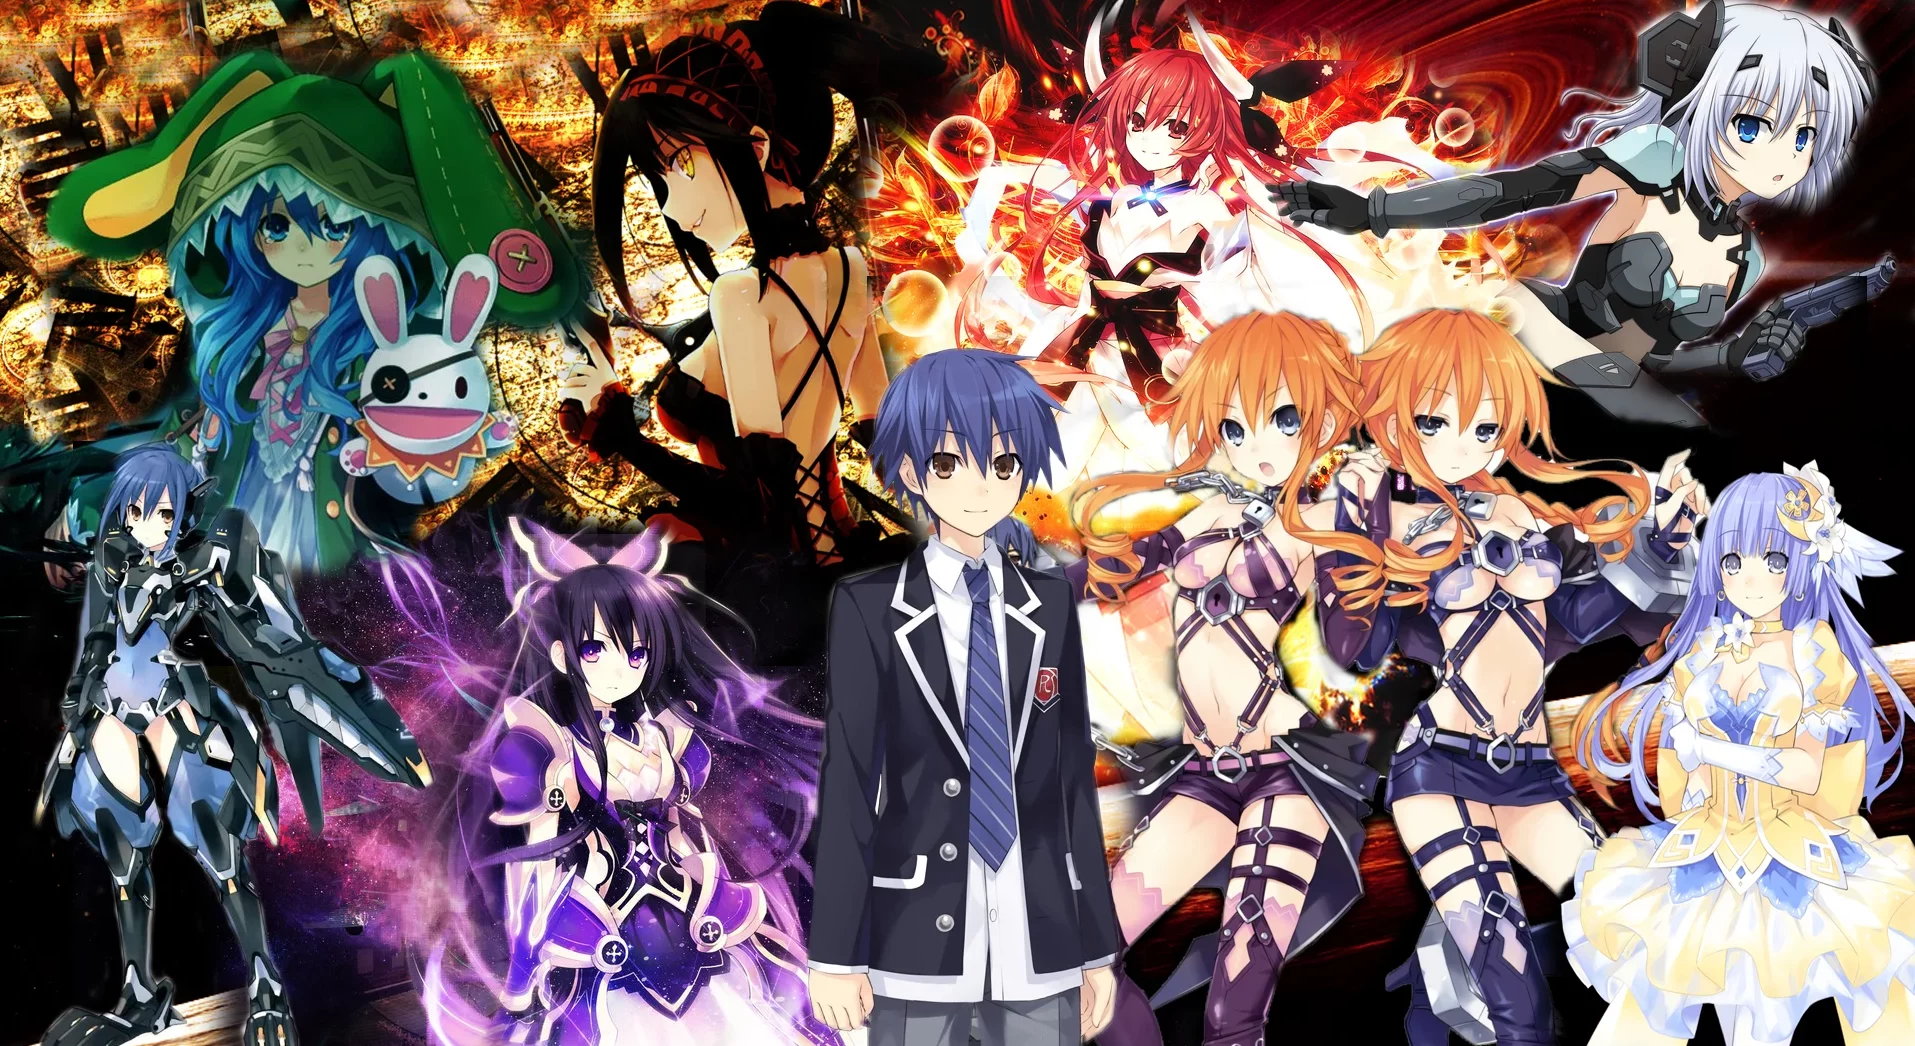 Date a Live's Shidou and others